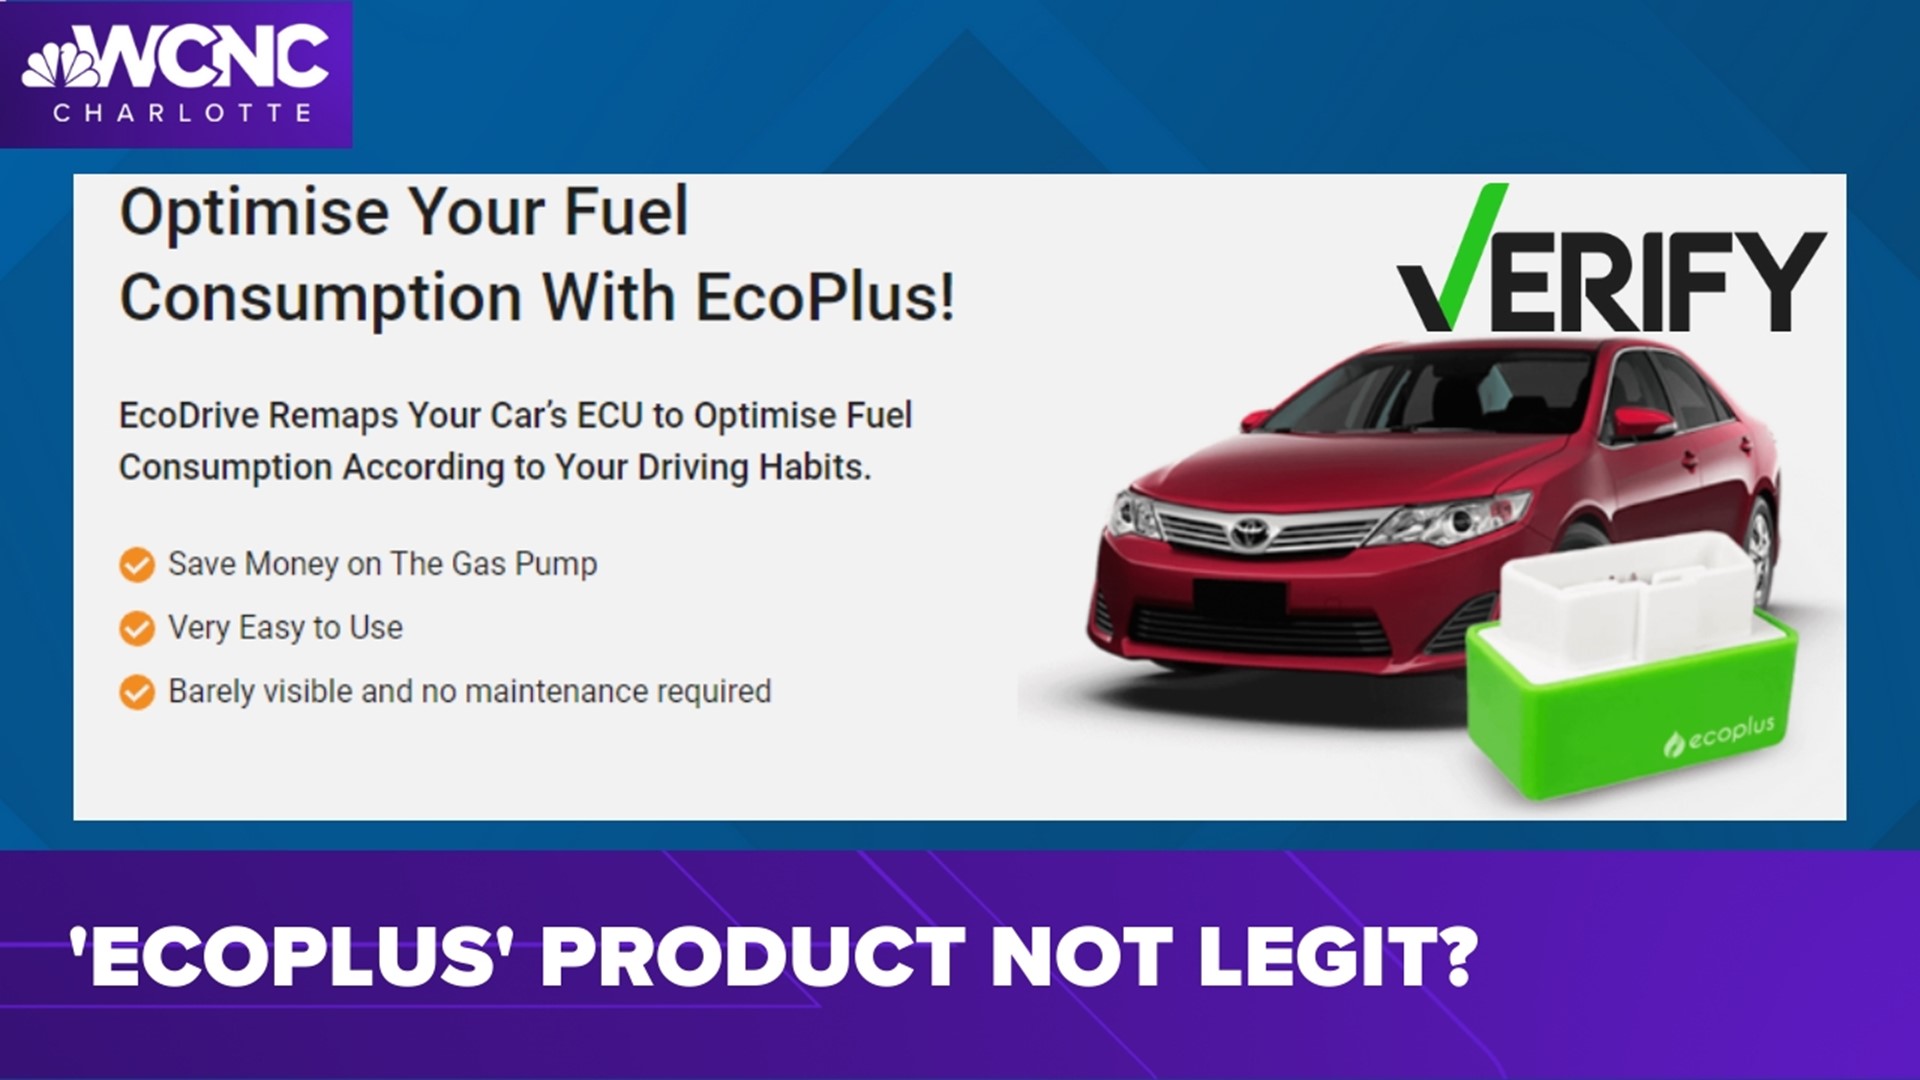 Some folks looking to save on fuel have asked us about a product online claiming to help.